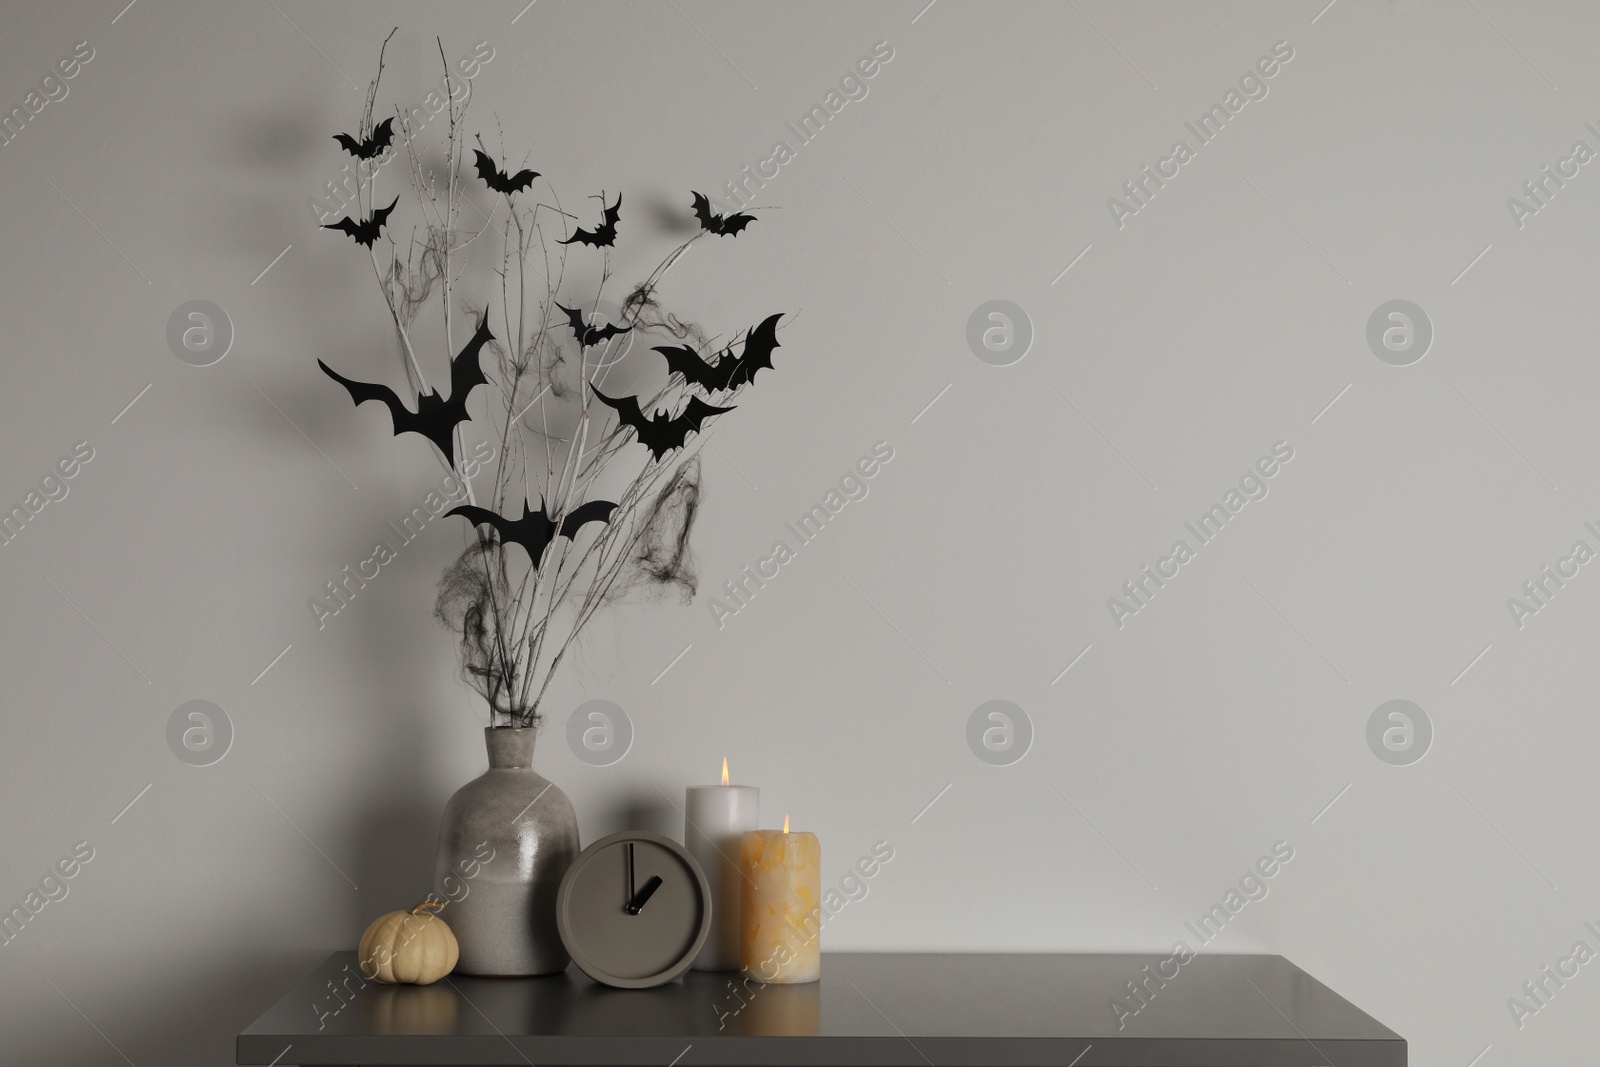 Photo of Alarm clock, burning candles and vase with paper bats  on table near white wall, space for text. Halloween decor